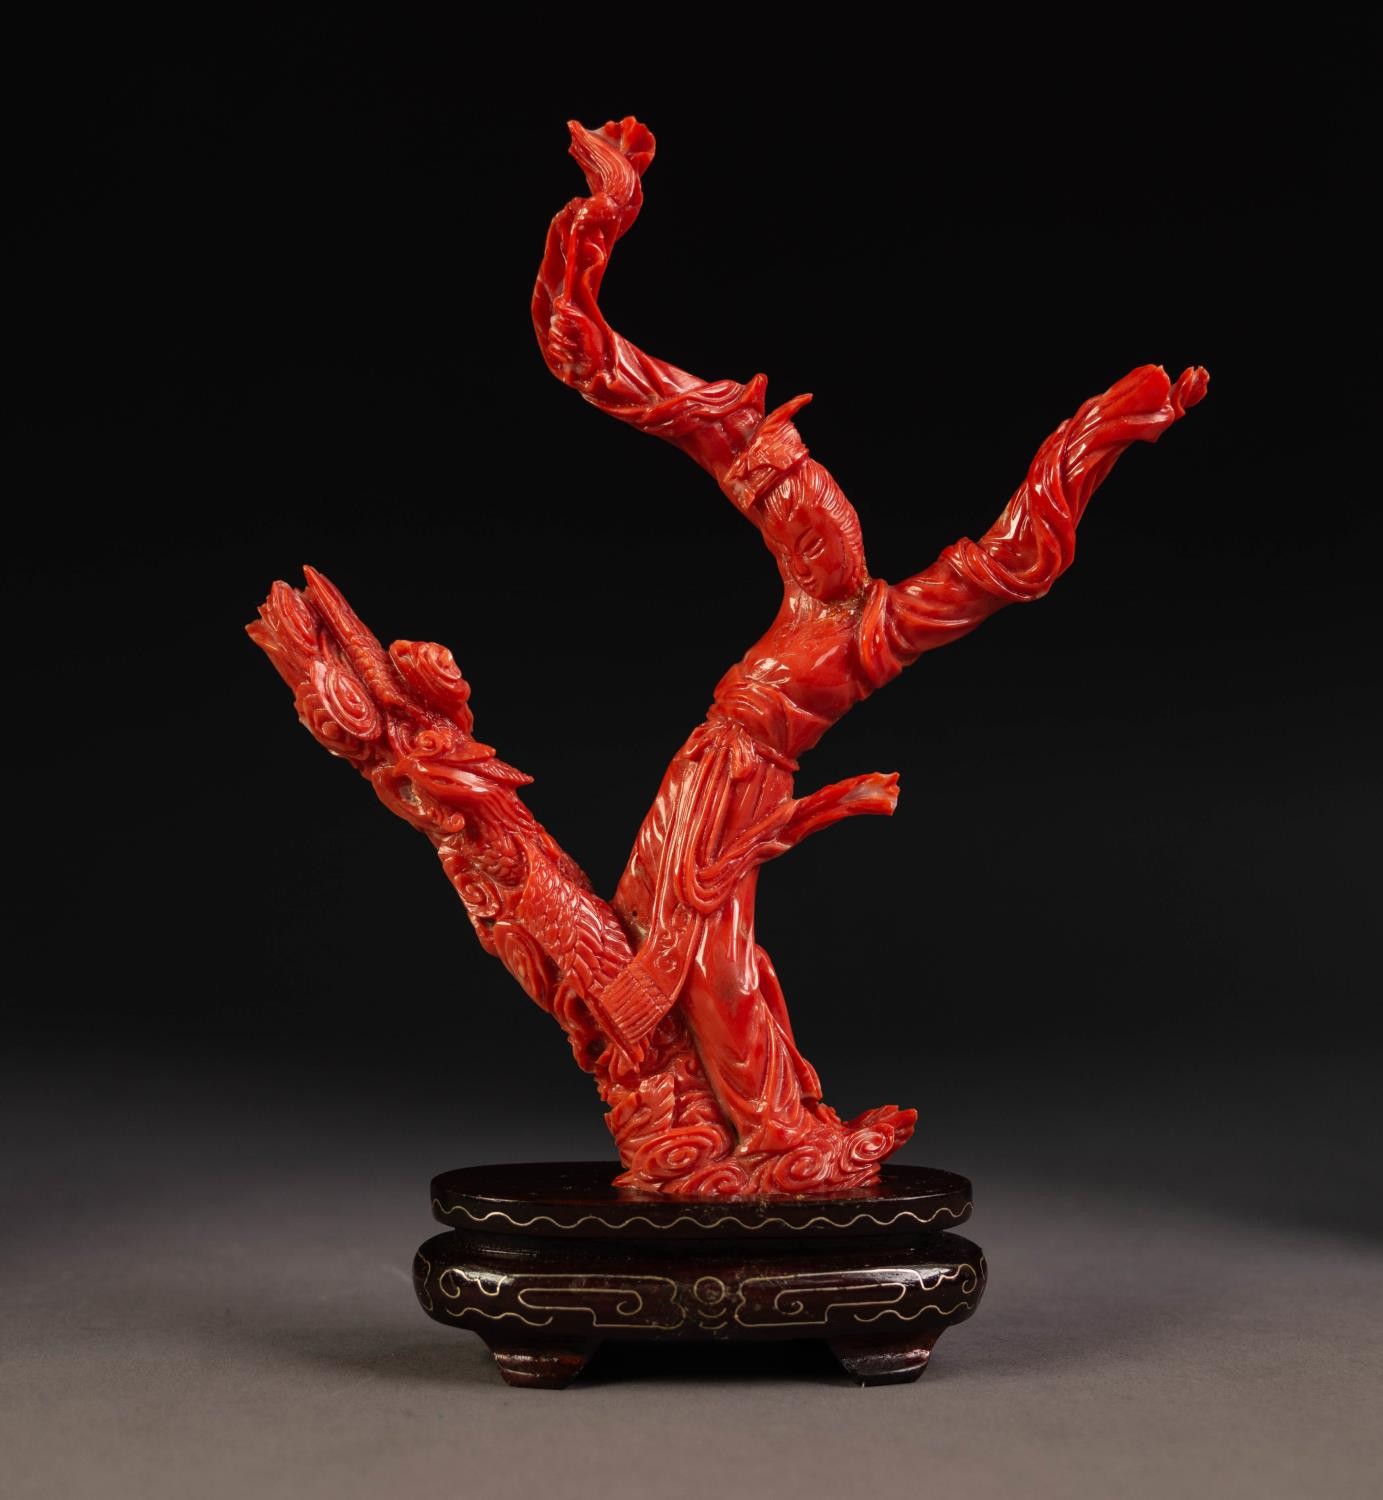 ORIENTAL CARVED RED CORAL DEPICTING A FEMALE FIGURE in flowing robes and a phoenix flying amidst